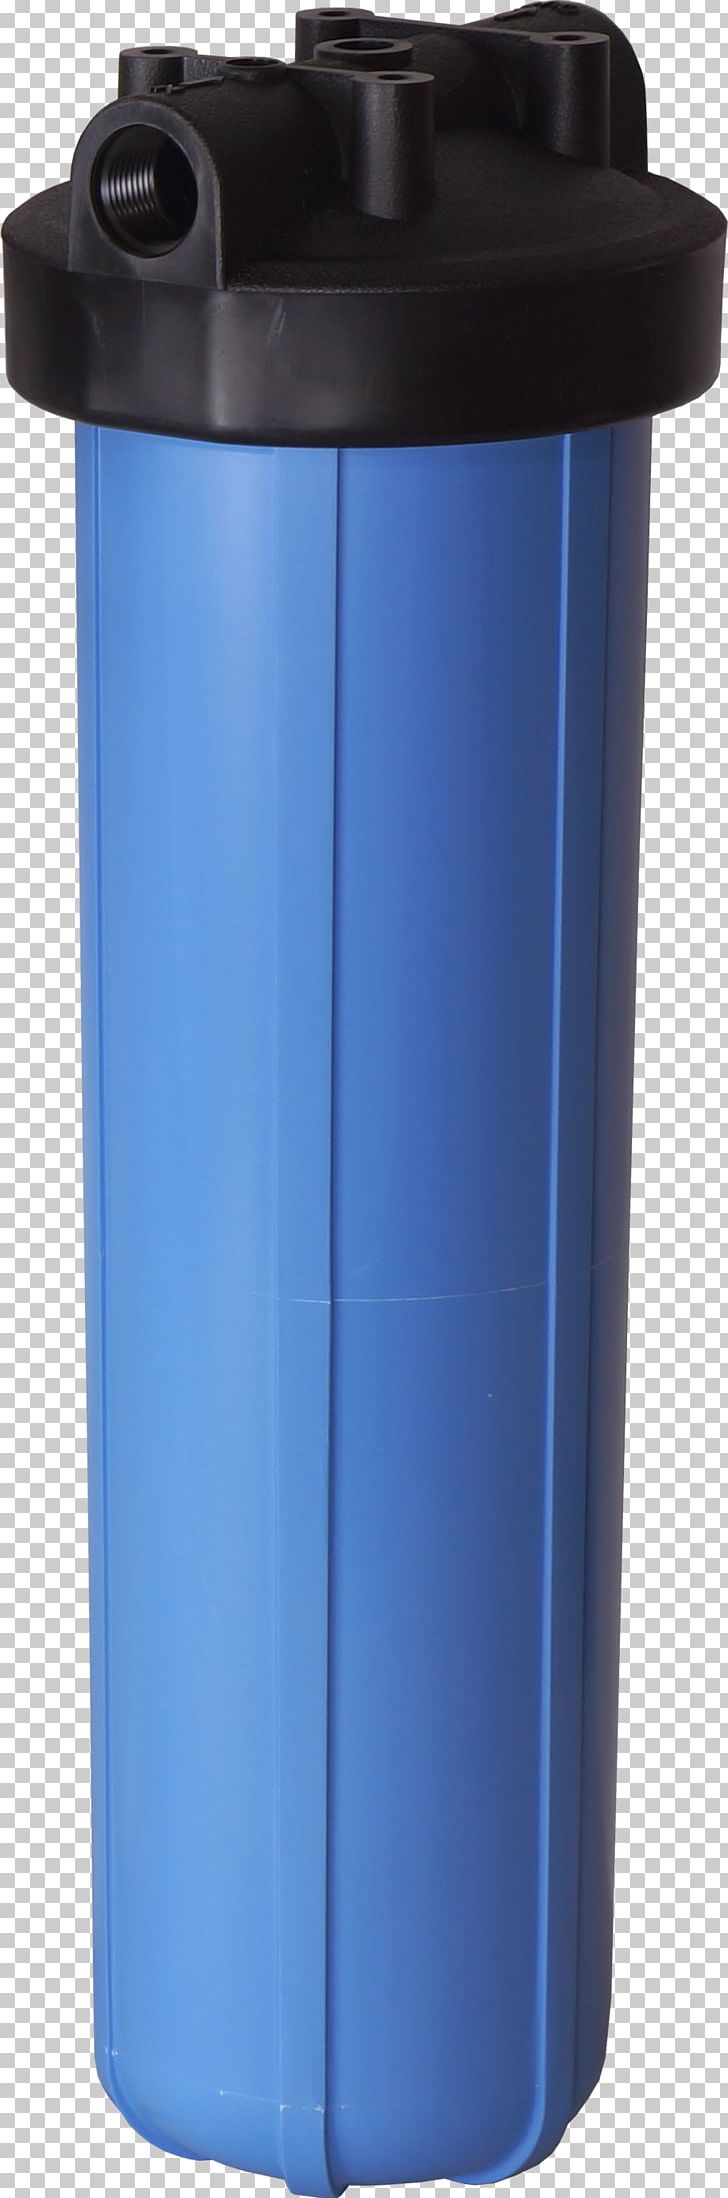 Water Filter Carbon Filtering Filtration Water Purification PNG, Clipart, Big Berkey Water Filters, Big Blue, Blue, Blue Water, Carbon Filtering Free PNG Download